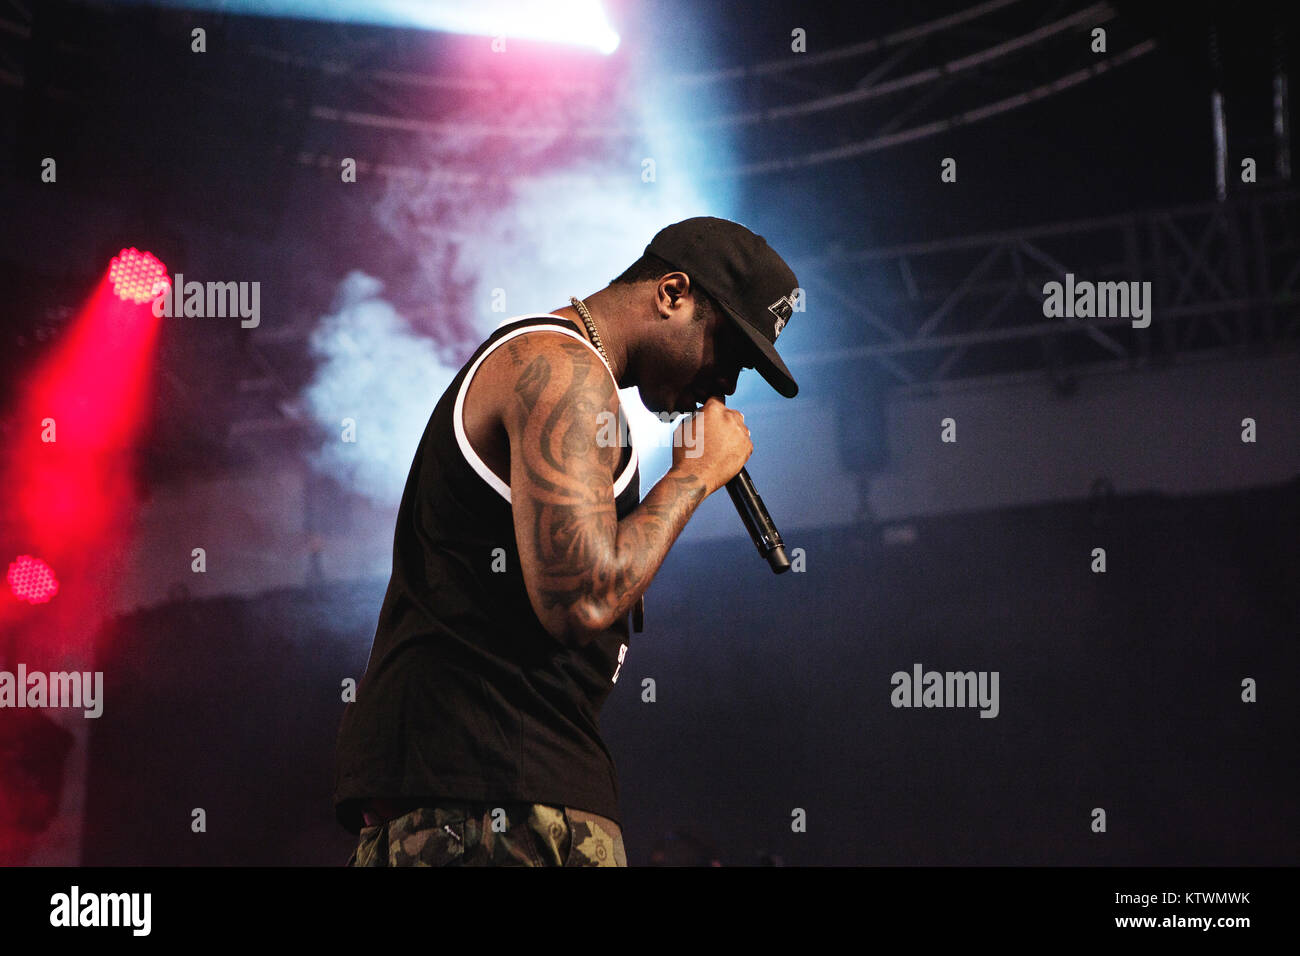 The American rapper and record producer Justin Scott originates from Mississippi and is better known by his stage name Big K.R.I.T. He is here pictured at a live concert at Roskilde Festival 2012. Denmark 08/07 2012. Stock Photo